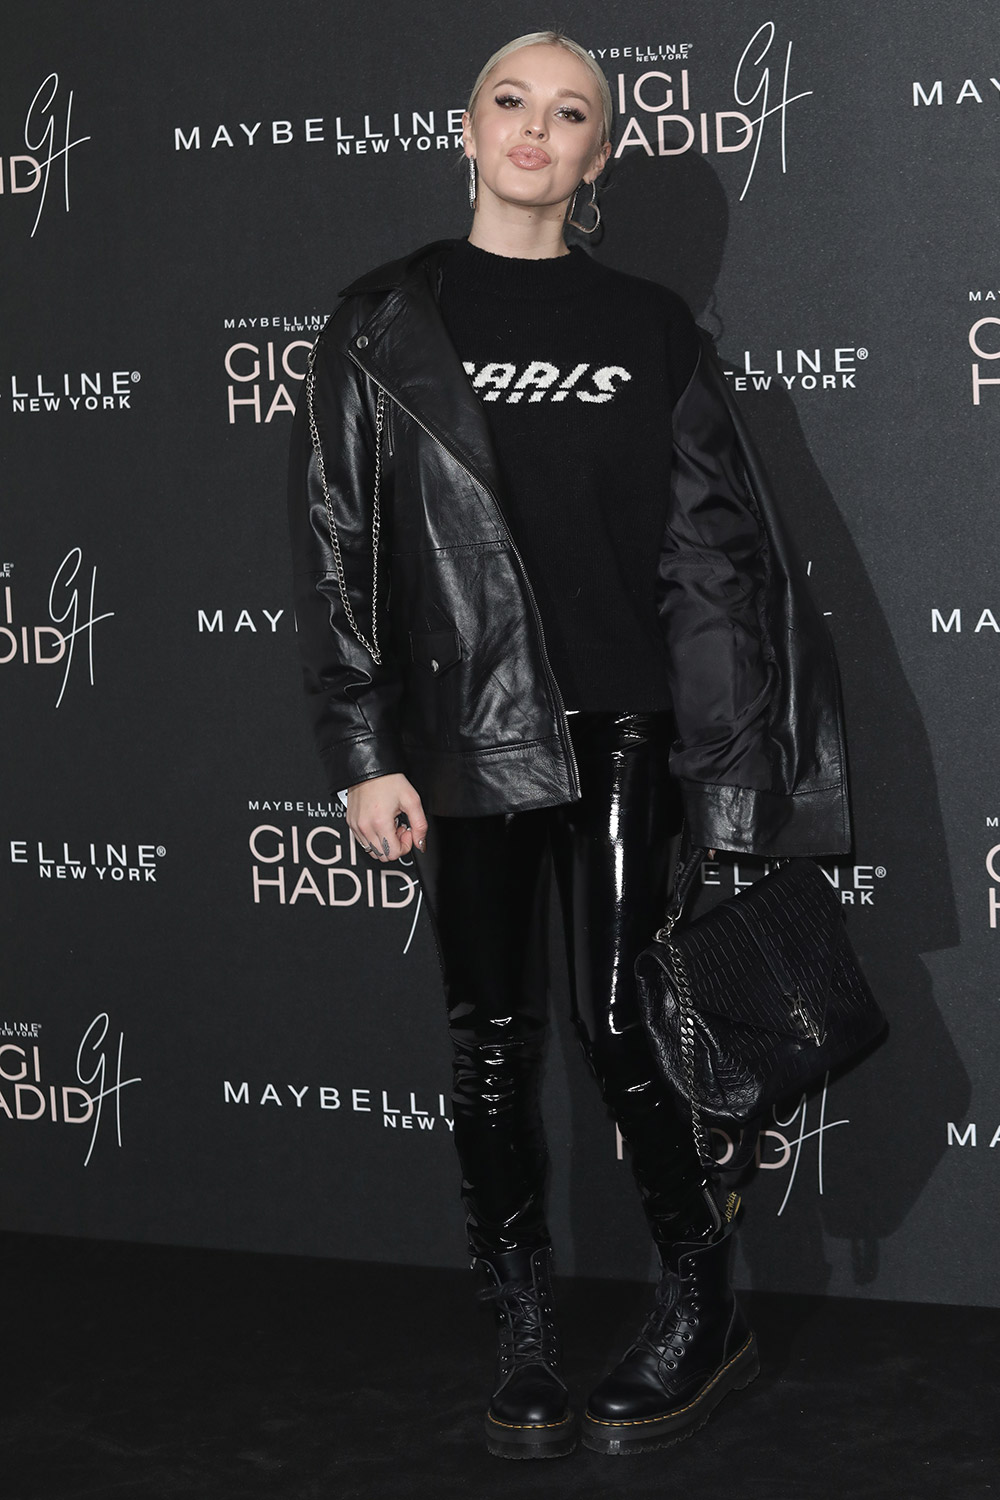 Betsy-Blue English attends Gigi x Maybelline VIP party